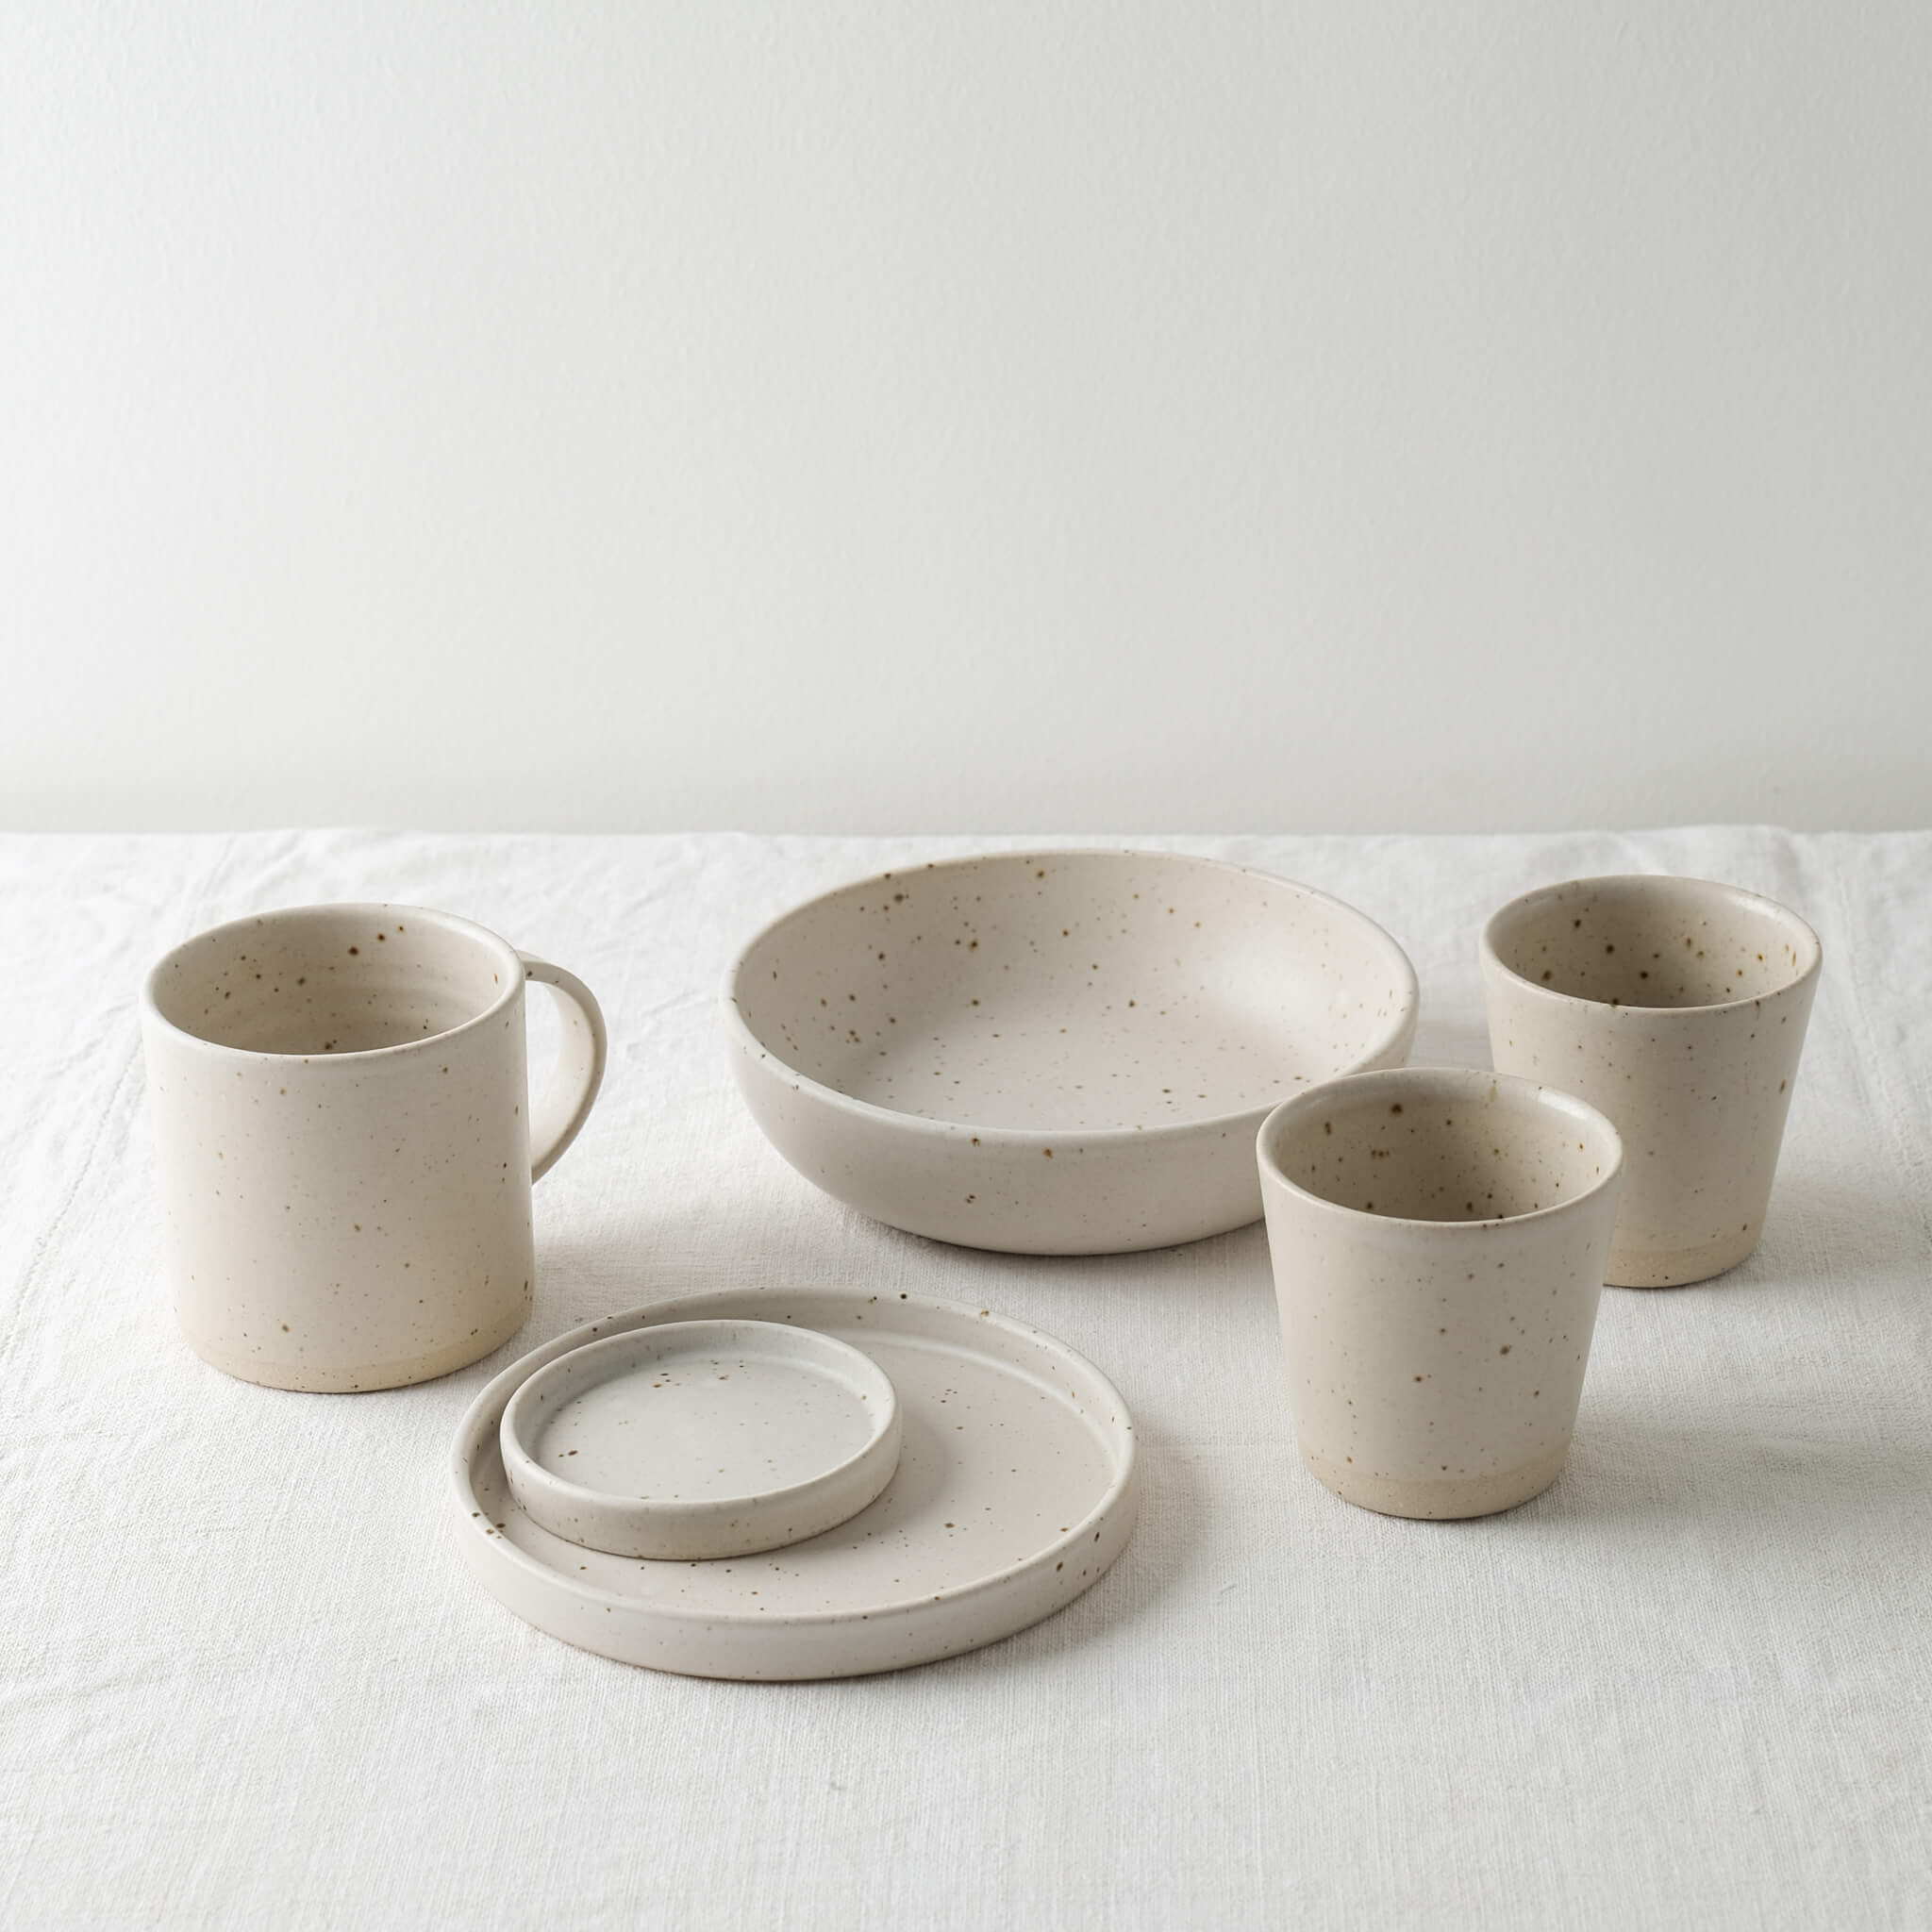 Dor & Tan Pinch Dish - Matte White & Speckled with co ordinating tableware